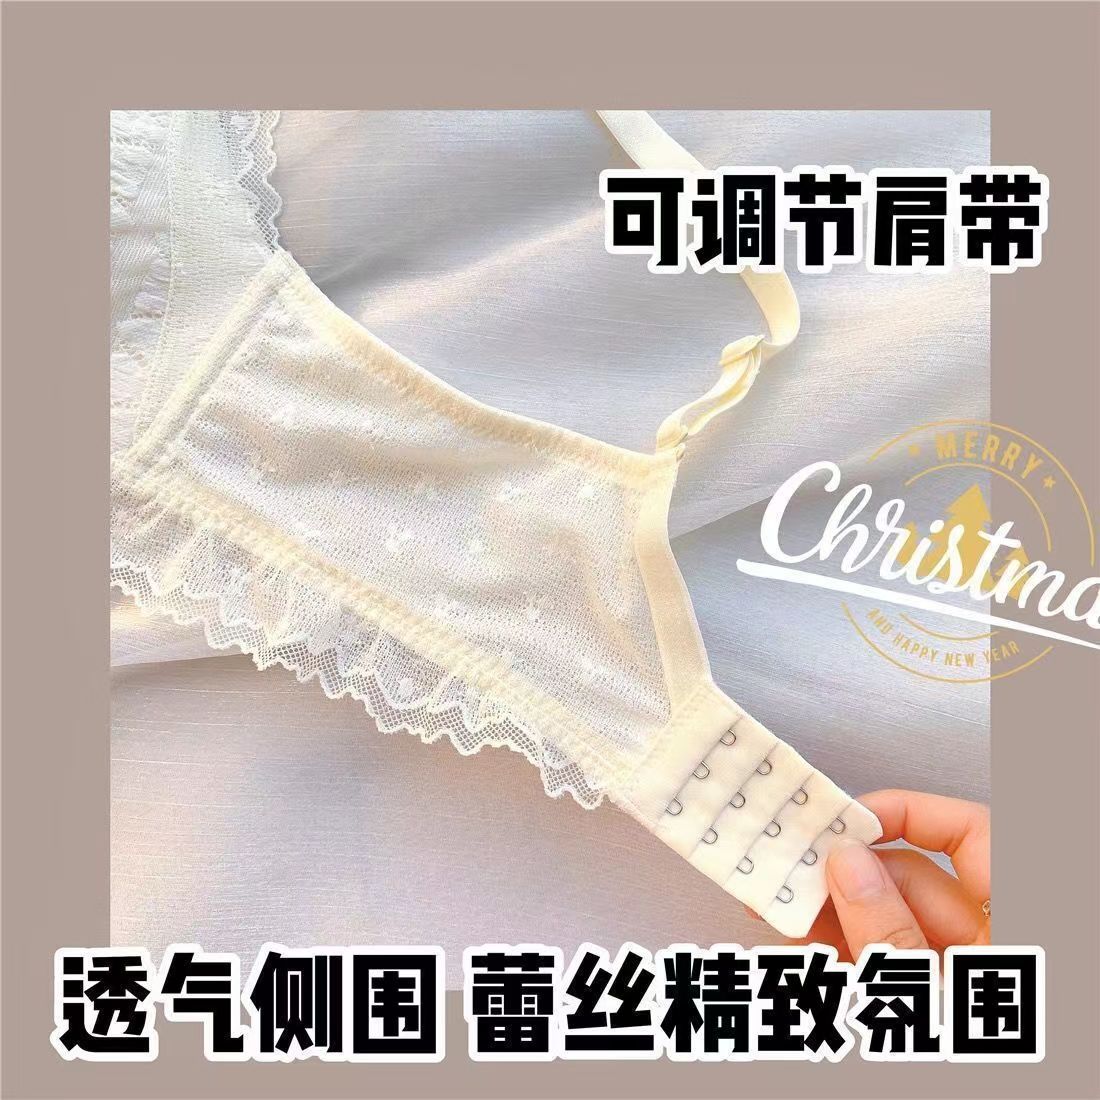 Pure desire wind summer thin section breathable small chest gather underwear female Japanese sweet girl bra without steel ring bra